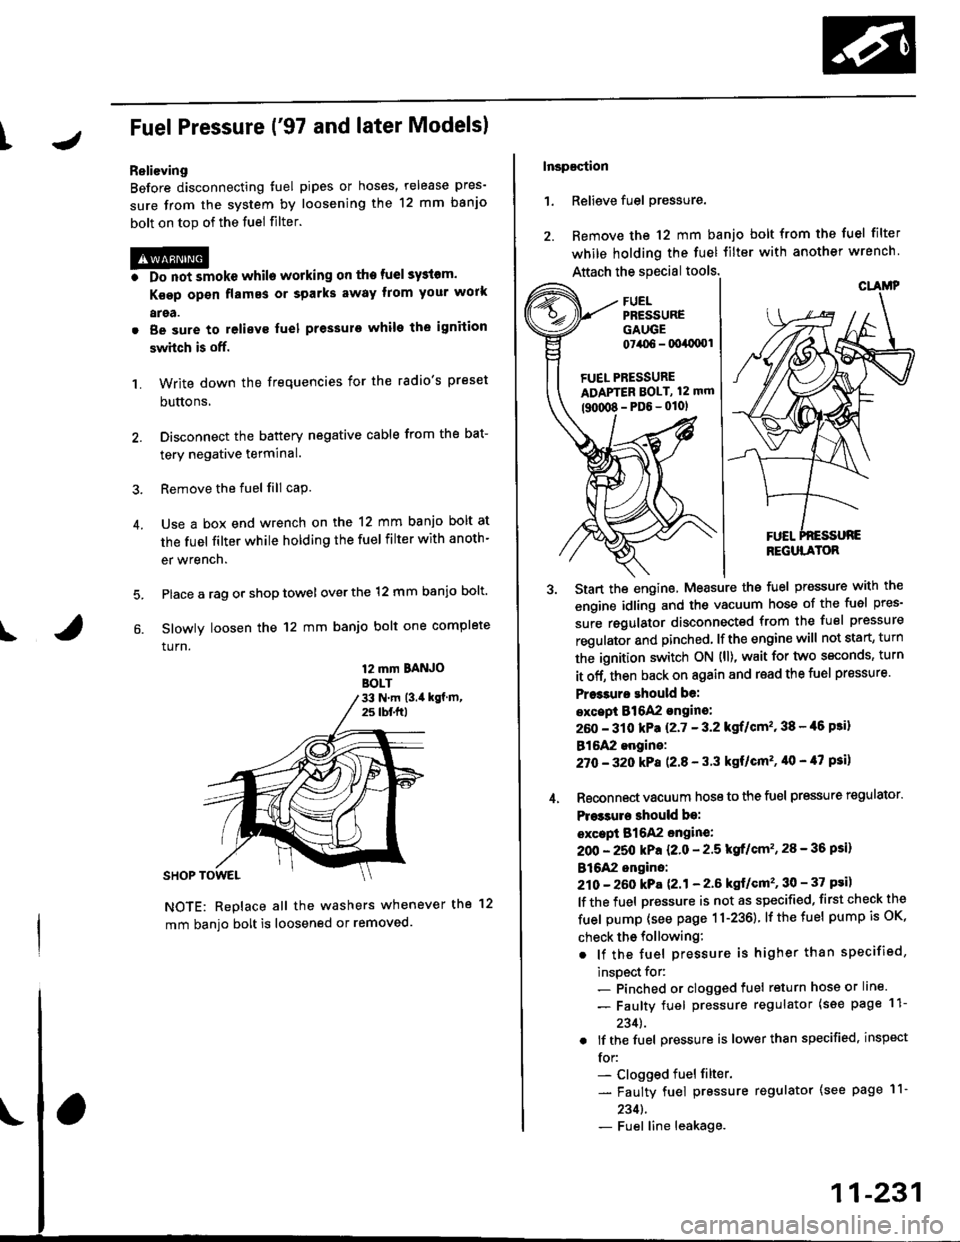 HONDA CIVIC 1996 6.G Workshop Manual tJFuel Pressure {97 and later Models)
ReliGving
Before disconnecting tuel pipes or hoses, release pres-
sure from the system by loosening the 12 mm banjo
bolt on top of the fuel filter.
@o Do not smo